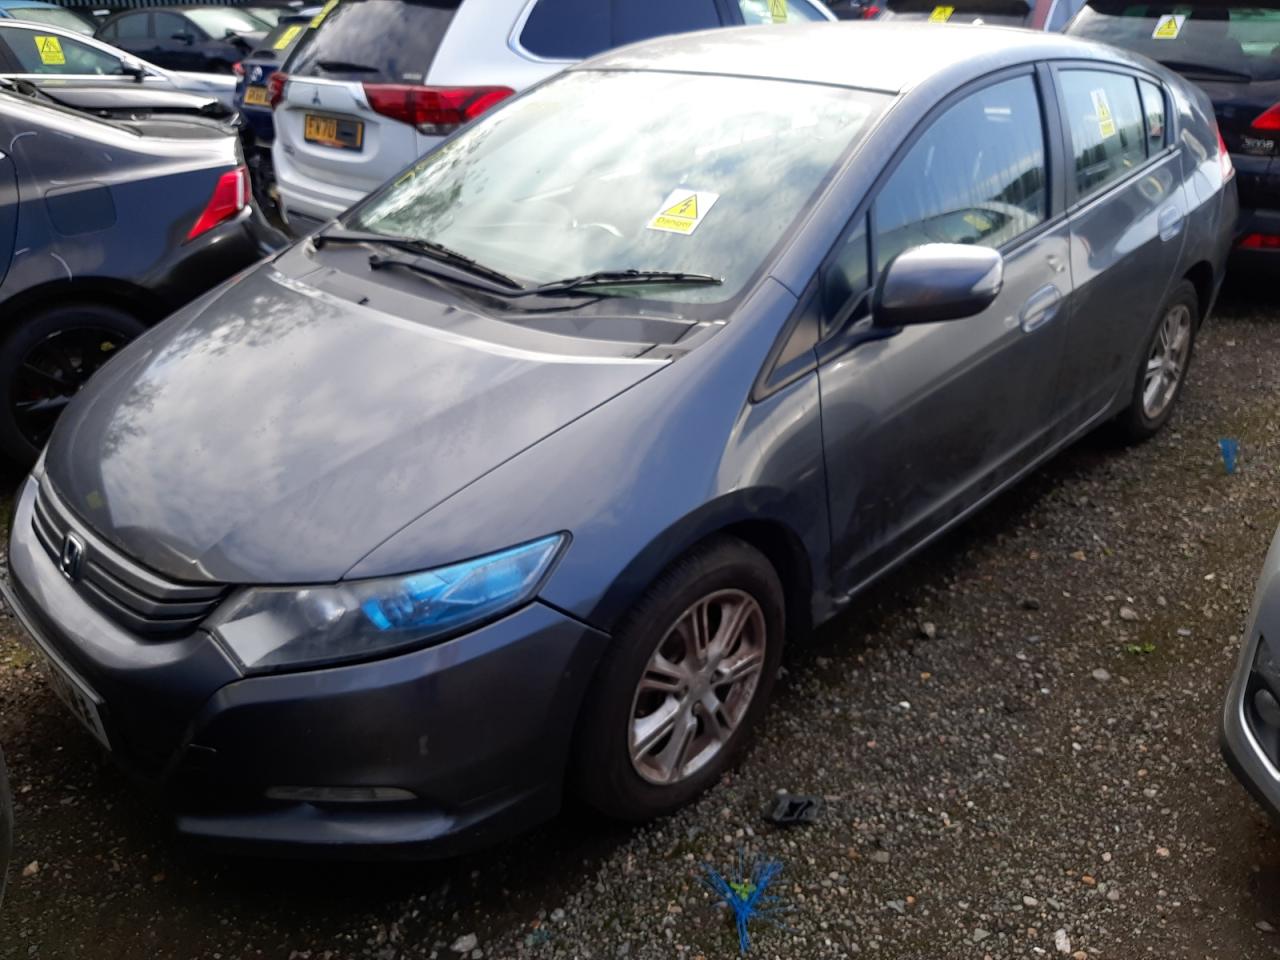 2012 HONDA INSIGHT SE for sale at Copart UK - Salvage Car Auctions